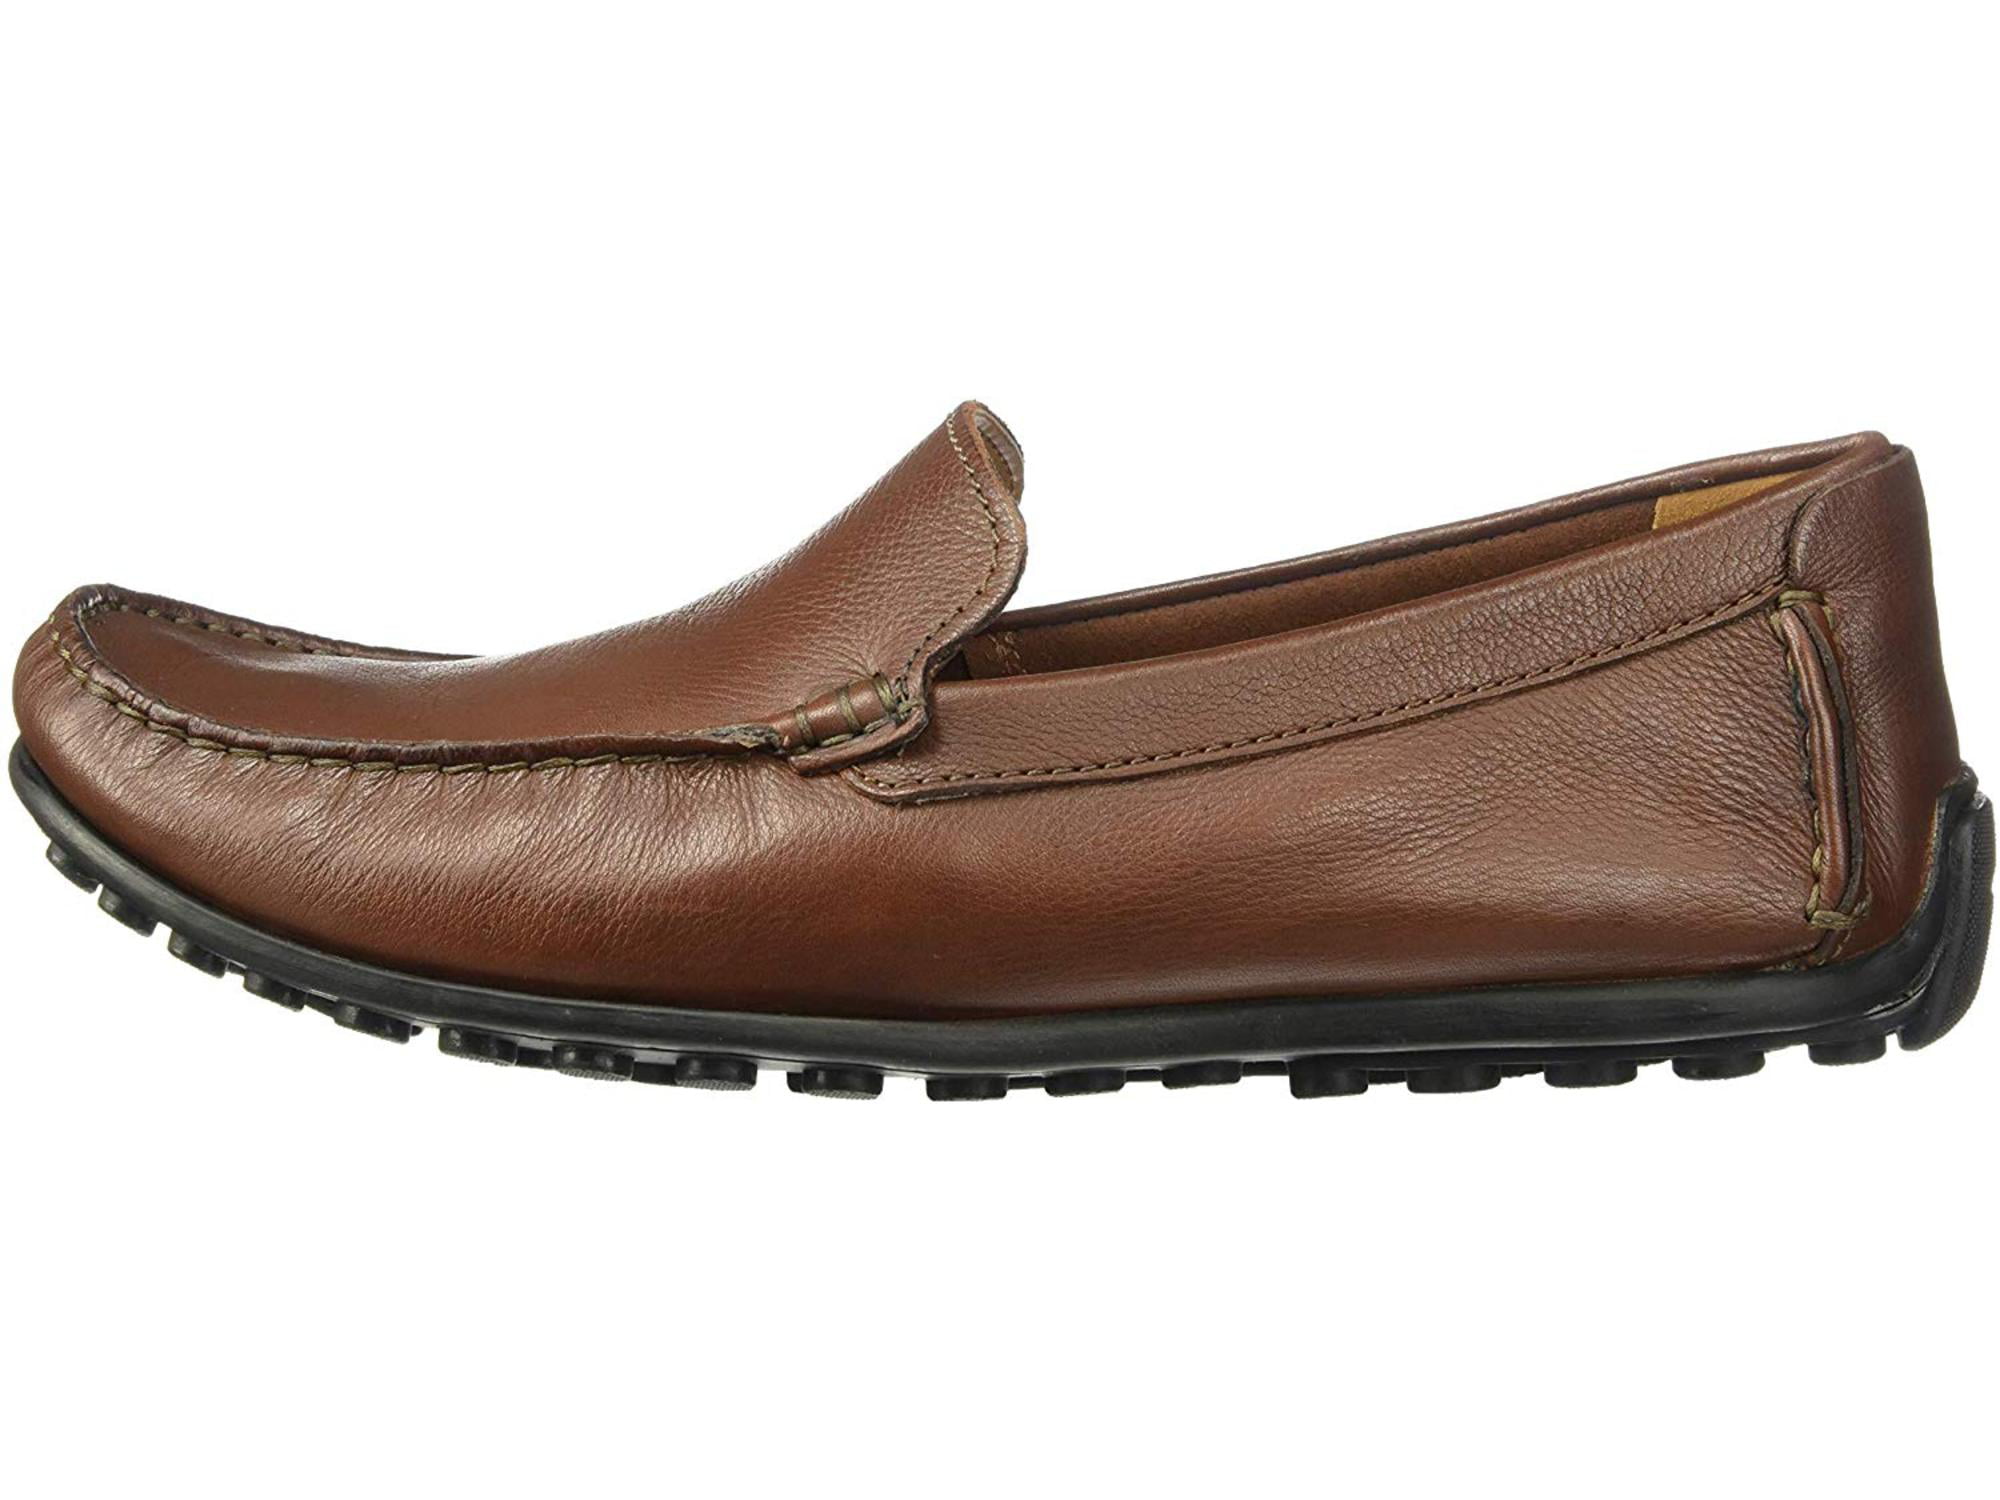 clarks men's loafers and moccasins